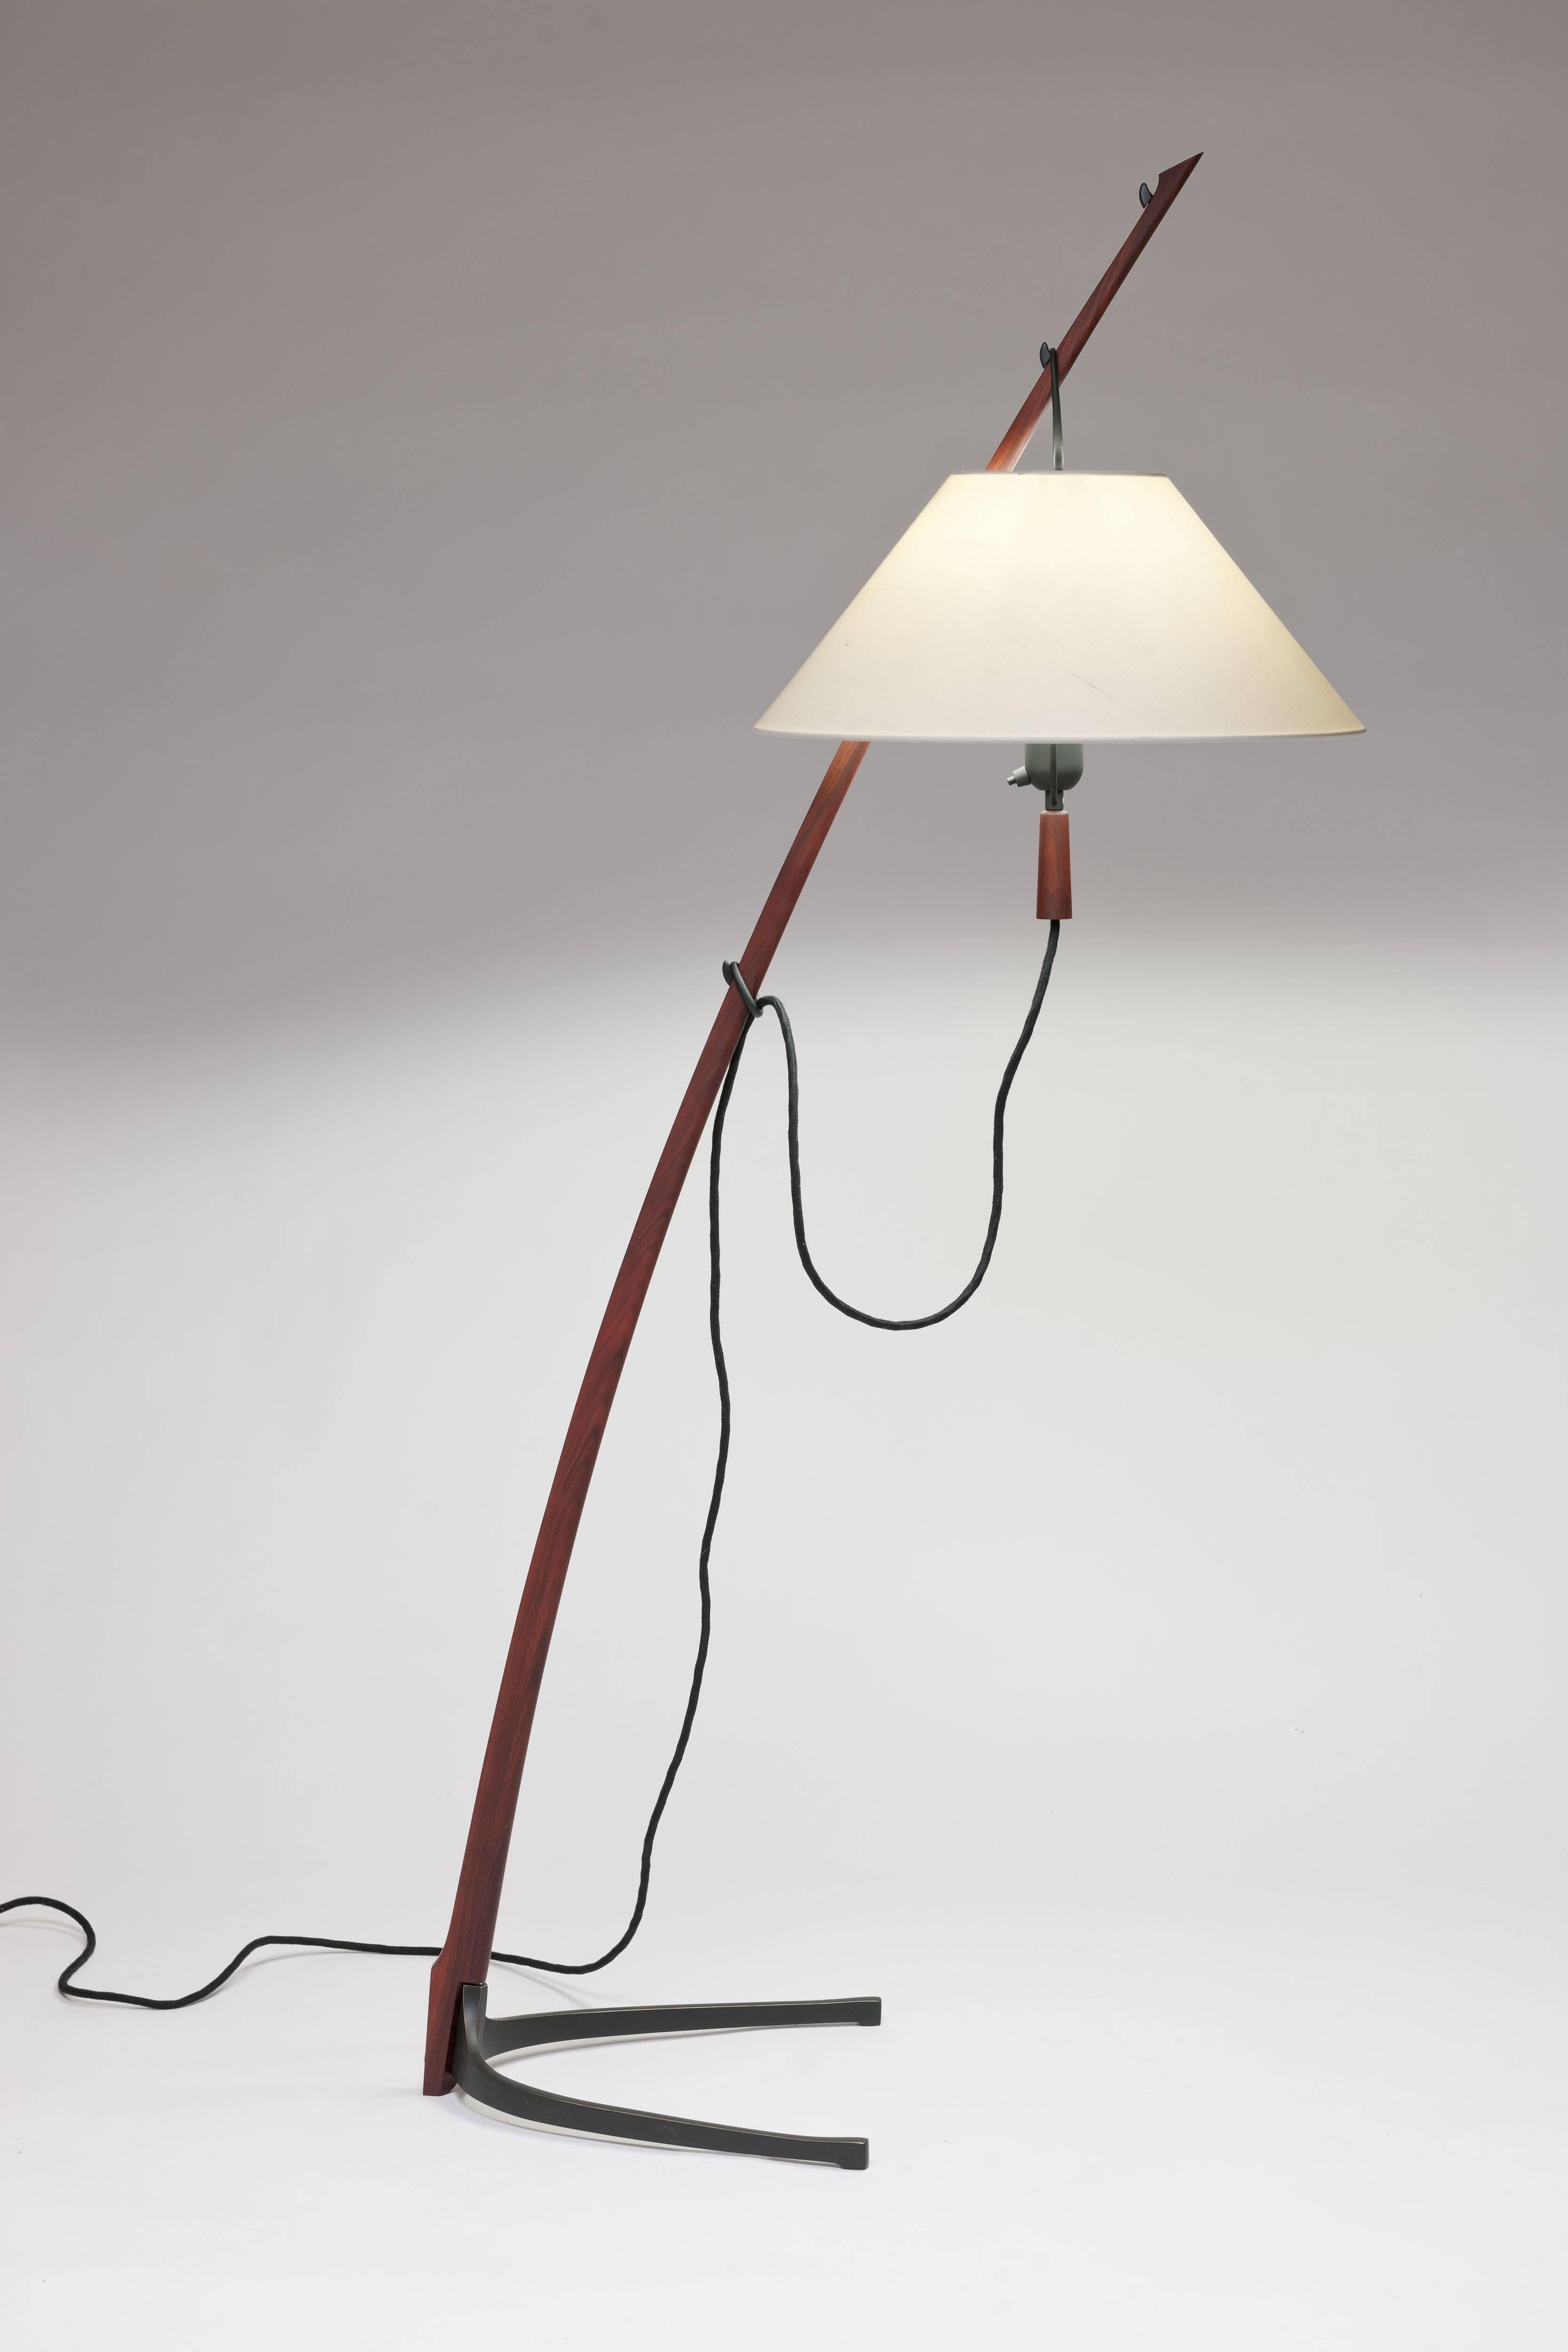 Contemporary re-edition of Kalmar's design from 1947. 
Rosewood saber-shaped stand with black brass fittings allowing the lamp shade to be positioned on brass hooks at three different, read-friendly height position. 
This is the most exclusive